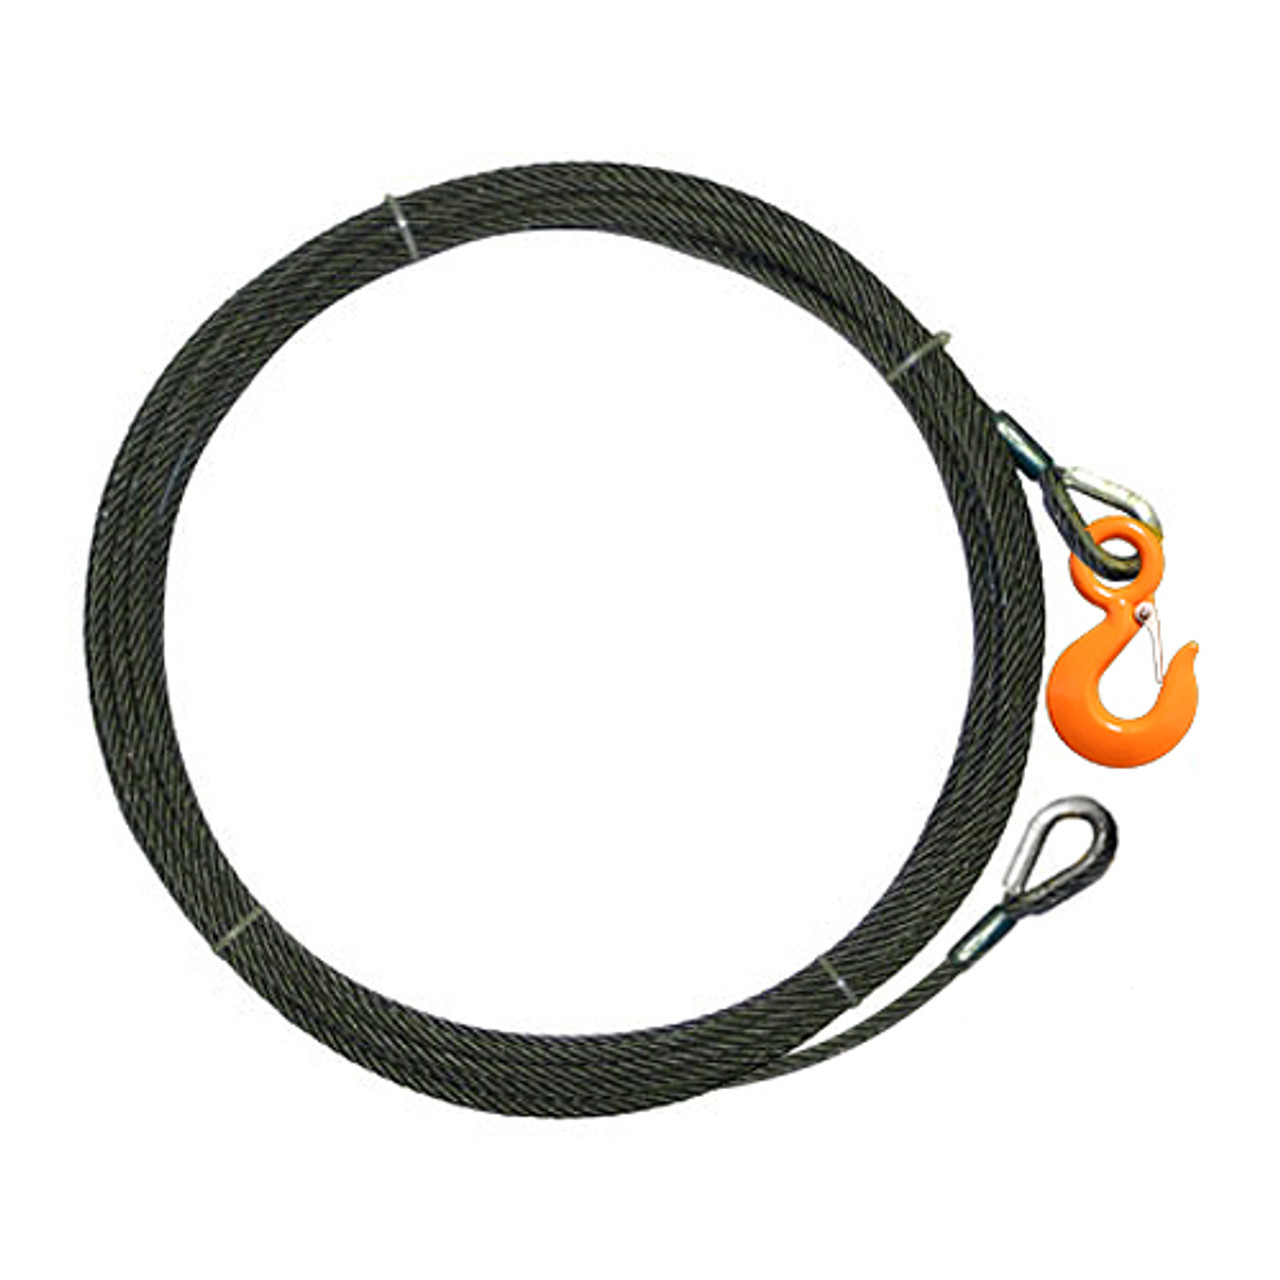 https://cdn11.bigcommerce.com/s-11cqjpjngs/images/stencil/1280x1280/products/66554/82542/5-8-x-100-ft-wire-rope-winch-line-extension-41200-lbs-breaking-strength-42__92704.1649114486.jpg?c=1